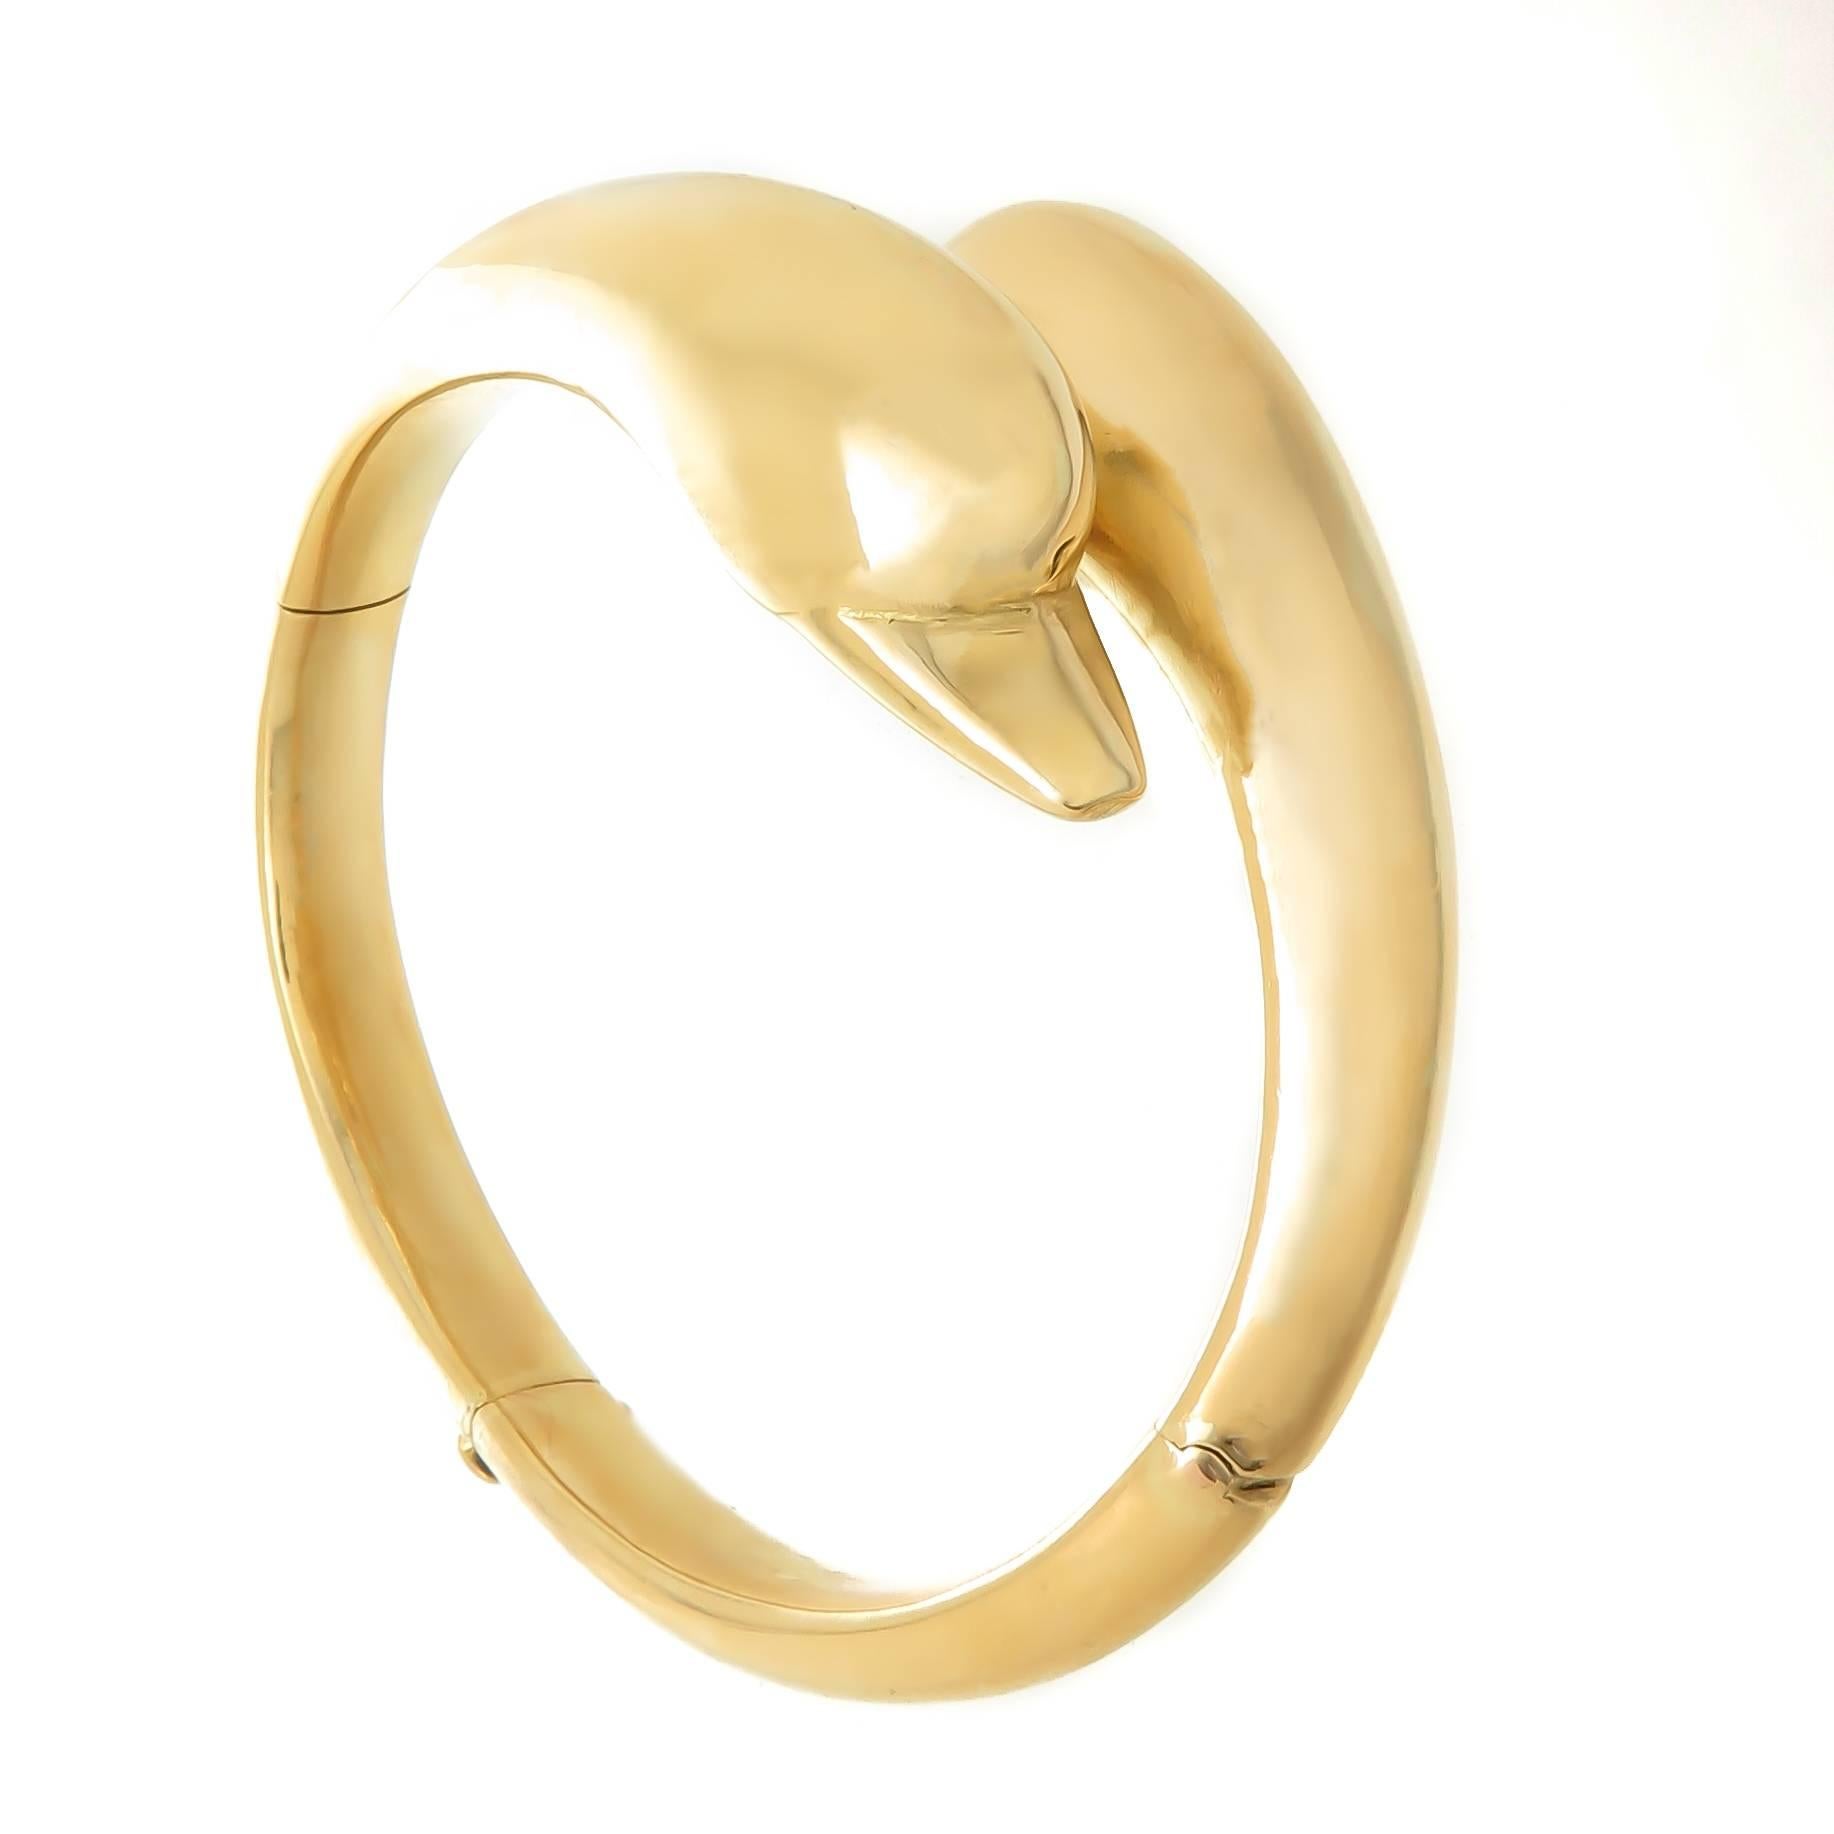 Circa 1980s LalaOunis 22K Yellow Gold Double Dolphin head Bangle Bracelet, the heads each measure approximately 1 1/4 inches in length, the inside measurement is 6 3/8 inches with a double hinge for easy on and off and a safety lock. Weighing 42.7